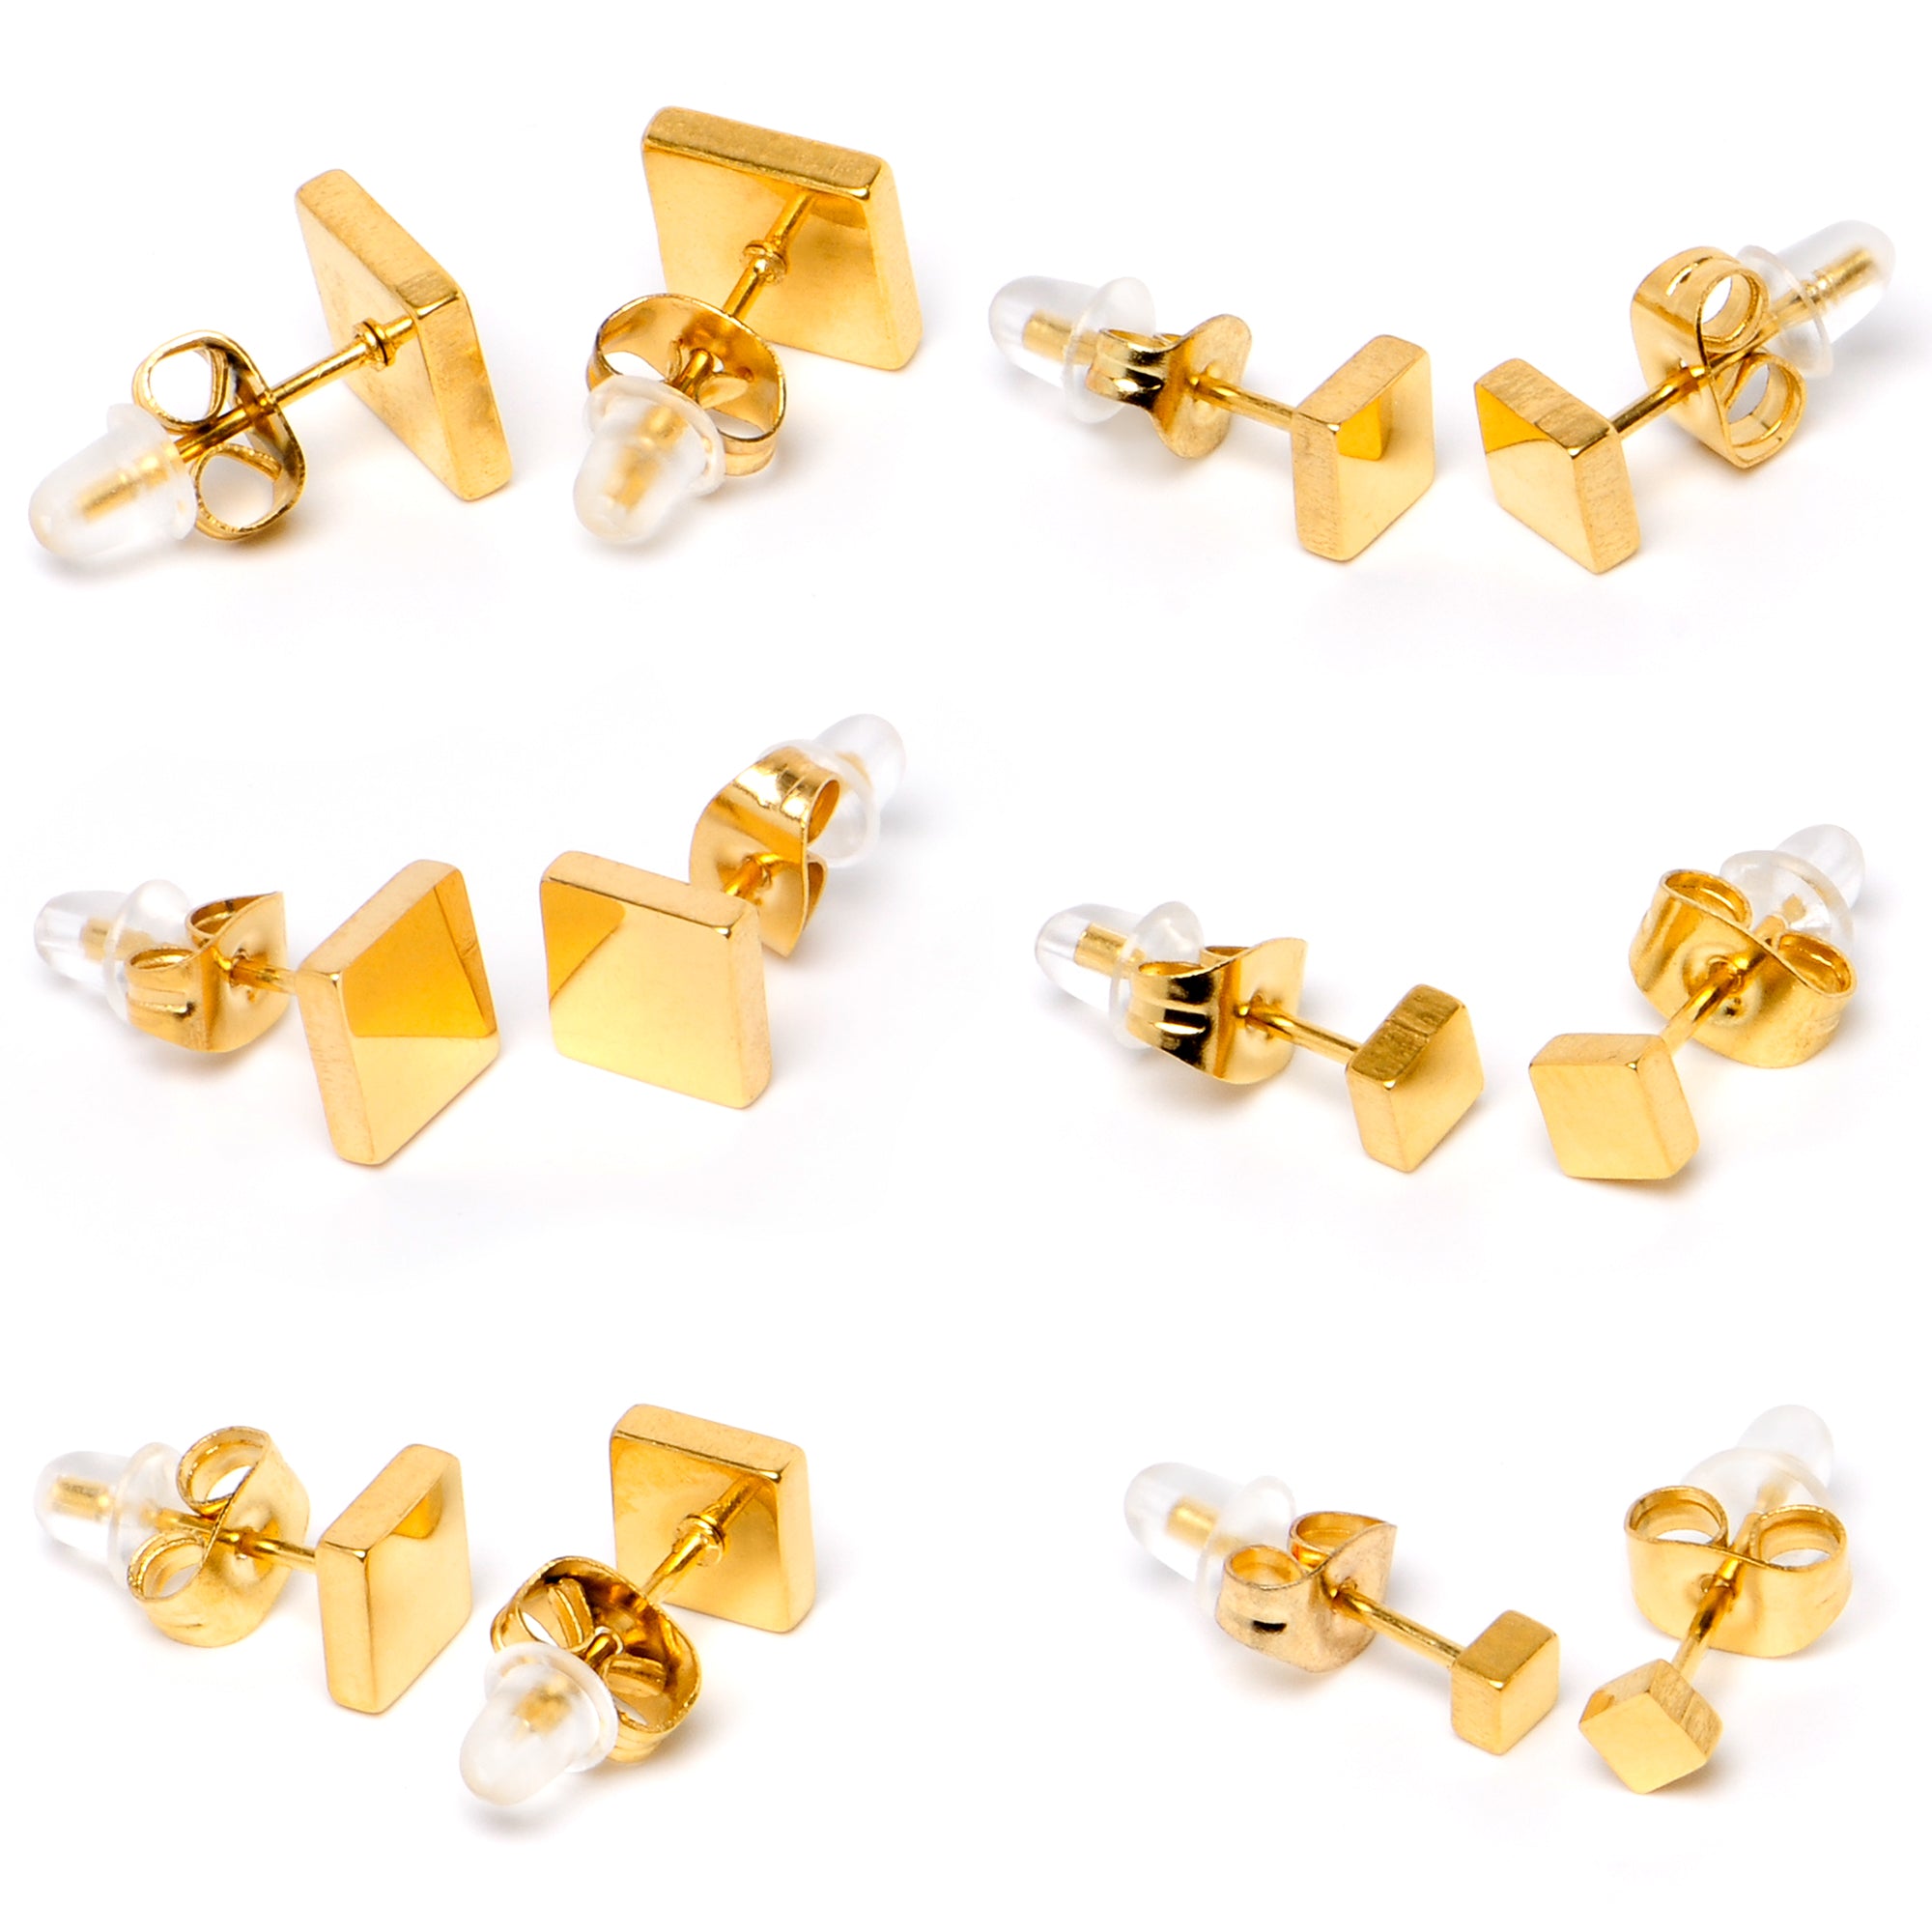 3mm-8mm Square Stud Gold Tone 316L Stainless Steel Earrings 6 Pack